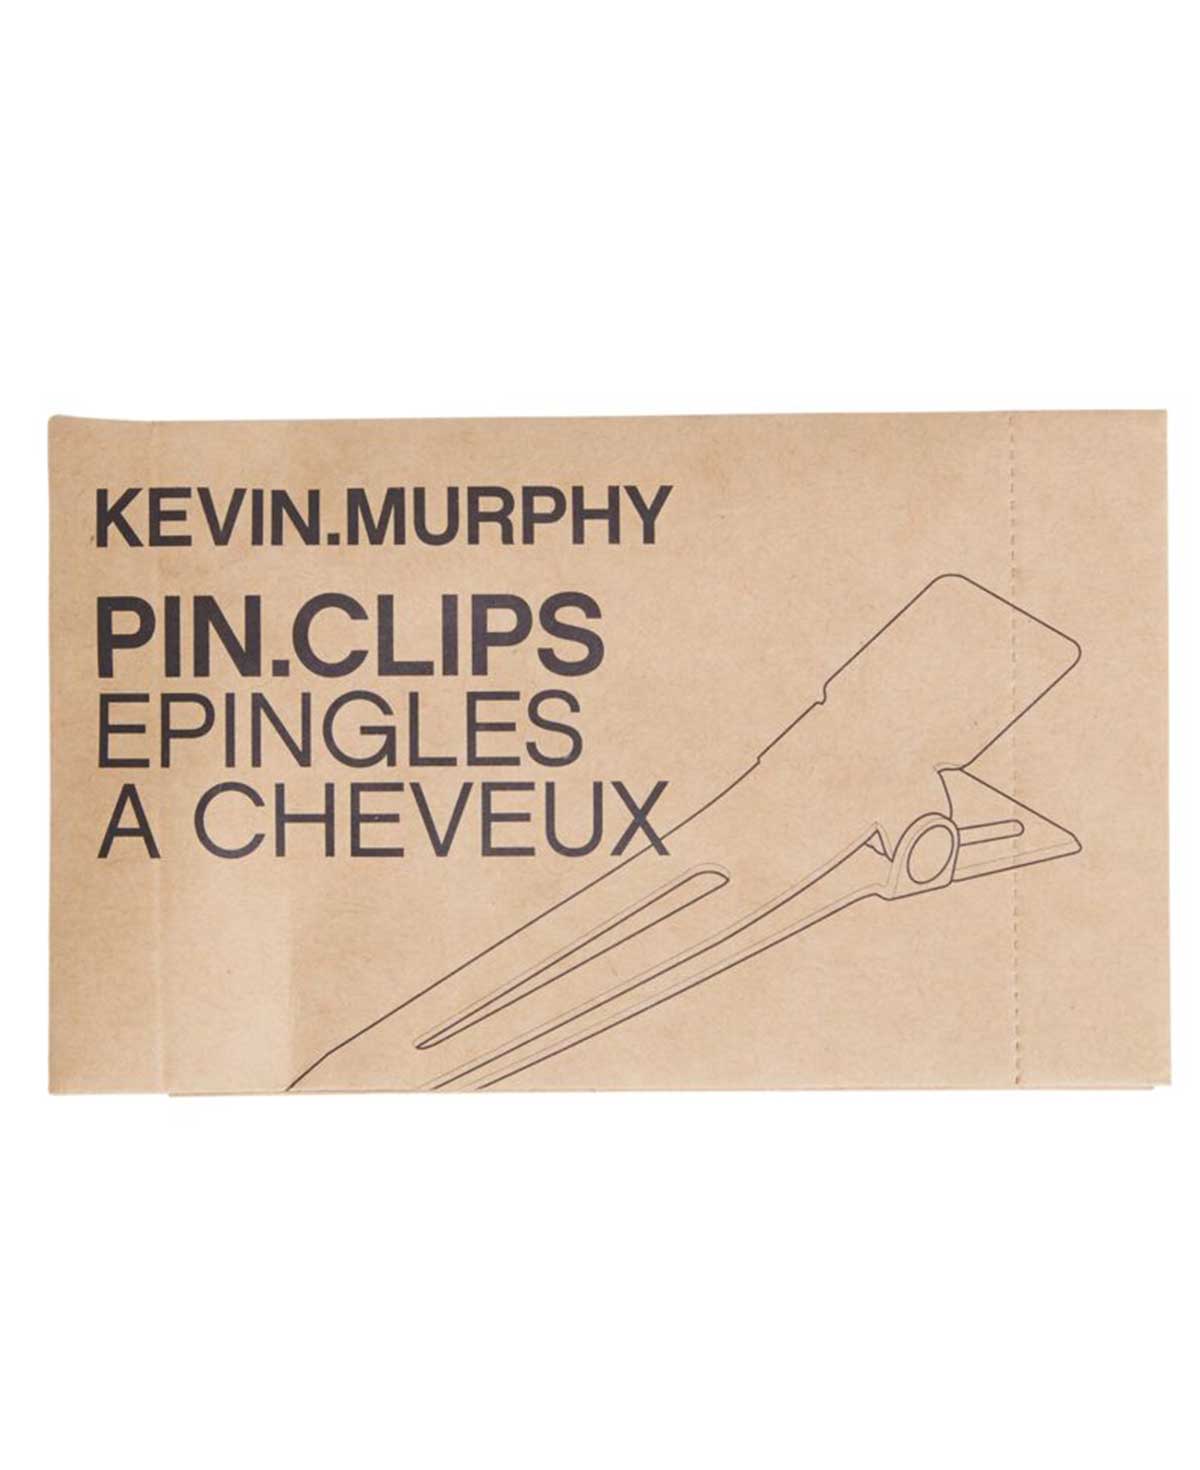 Kevin.Murphy PIN.CLIPS (6 in paper bag)